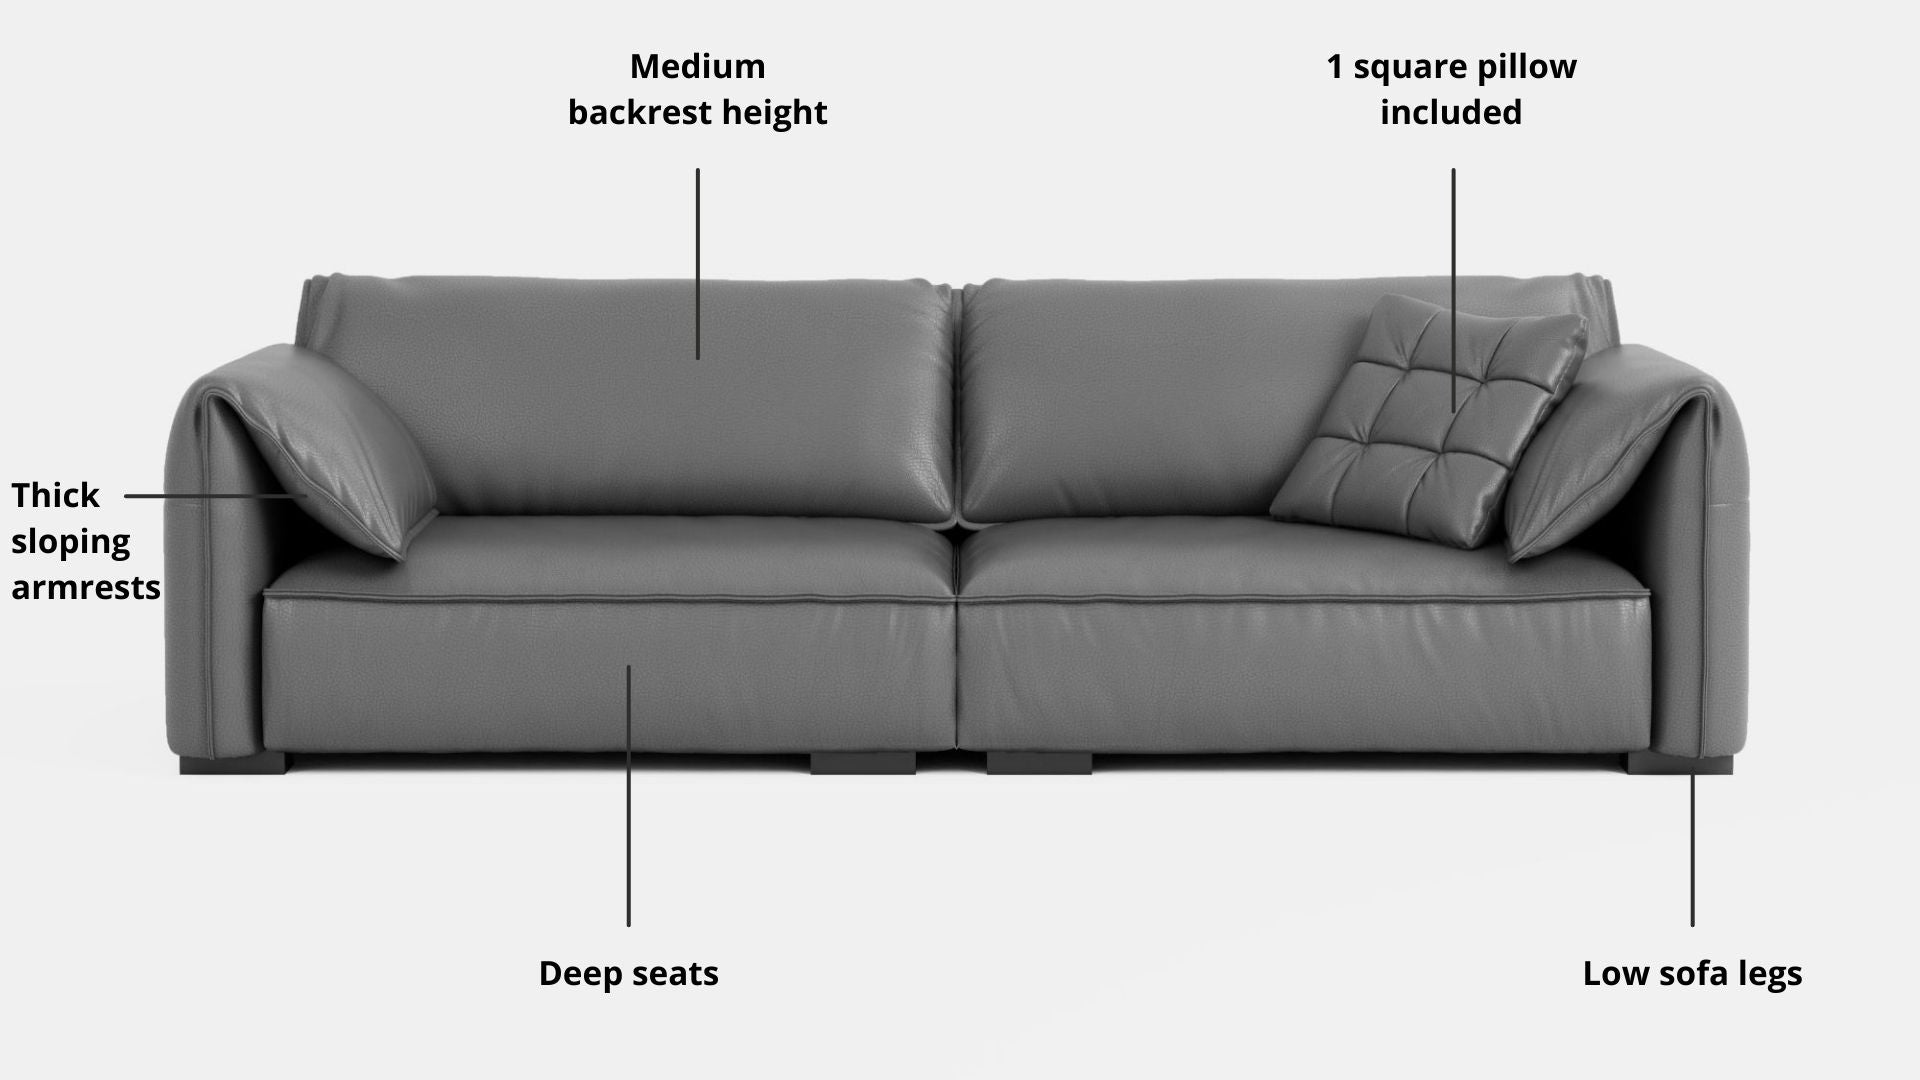 Key features such as armrest thickness, cushion height, seat depth and sofa leg height for Comfy Full Leather Sofa